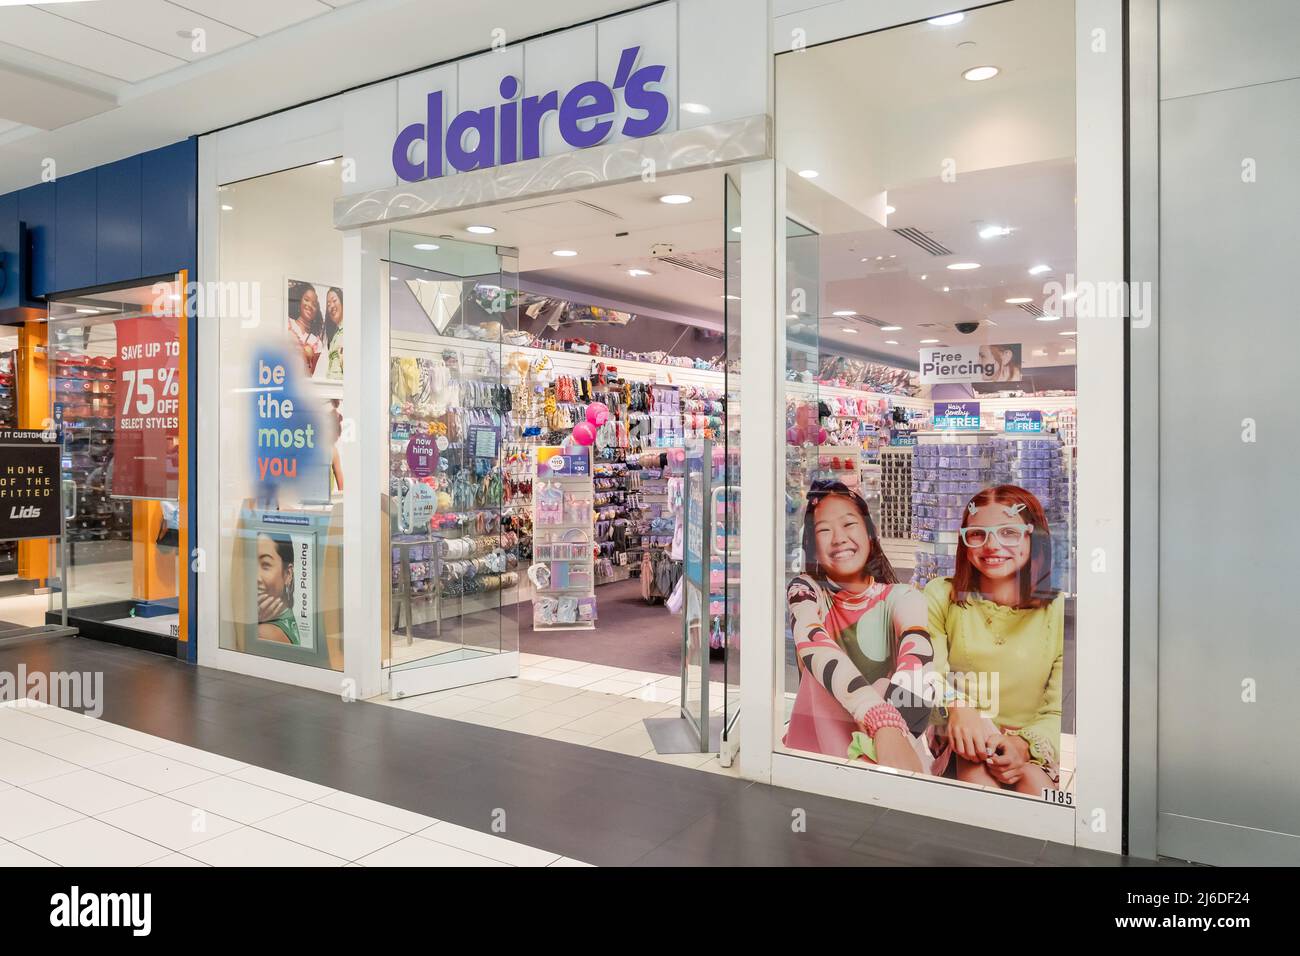 Claire's opens new immersive store in Paris